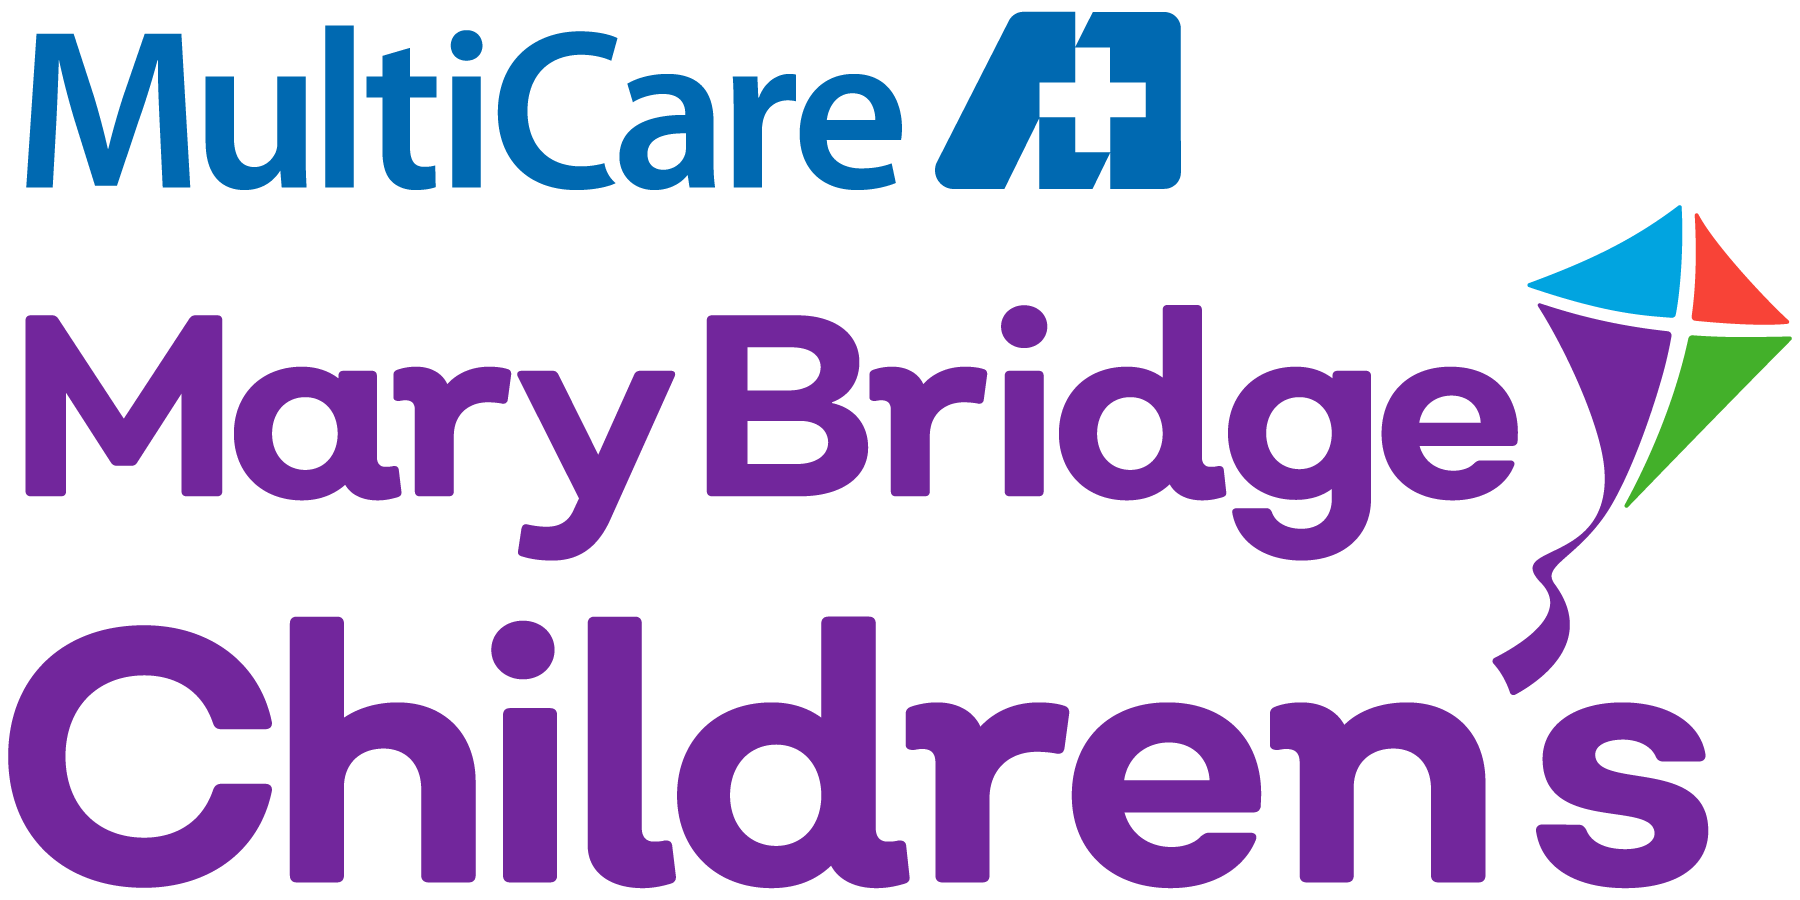 Mary Bridge Children's Urgent Care - Puyallup (under age 21 only) - Puyallup (WC) Logo